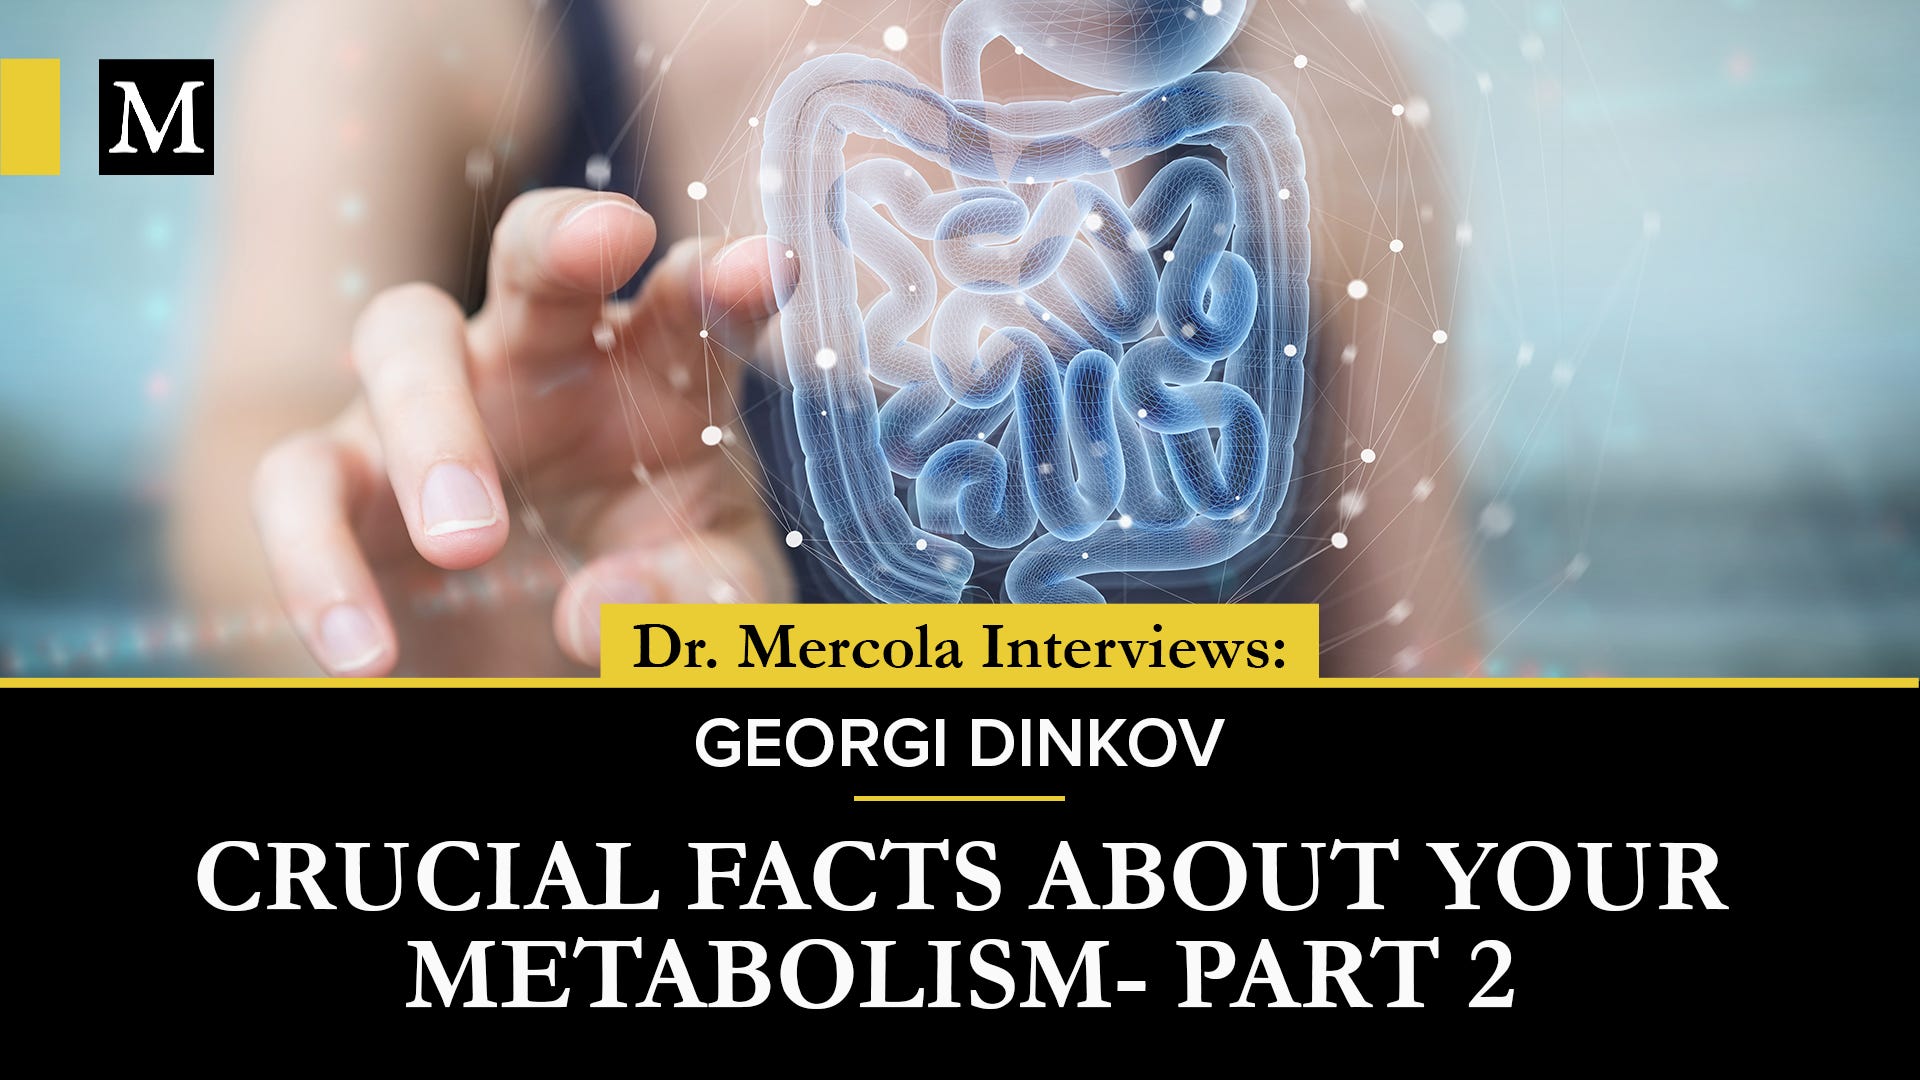 Crucial Facts About Your Metabolism - Discussion Between Georgi Dinkov & Dr. Mercola